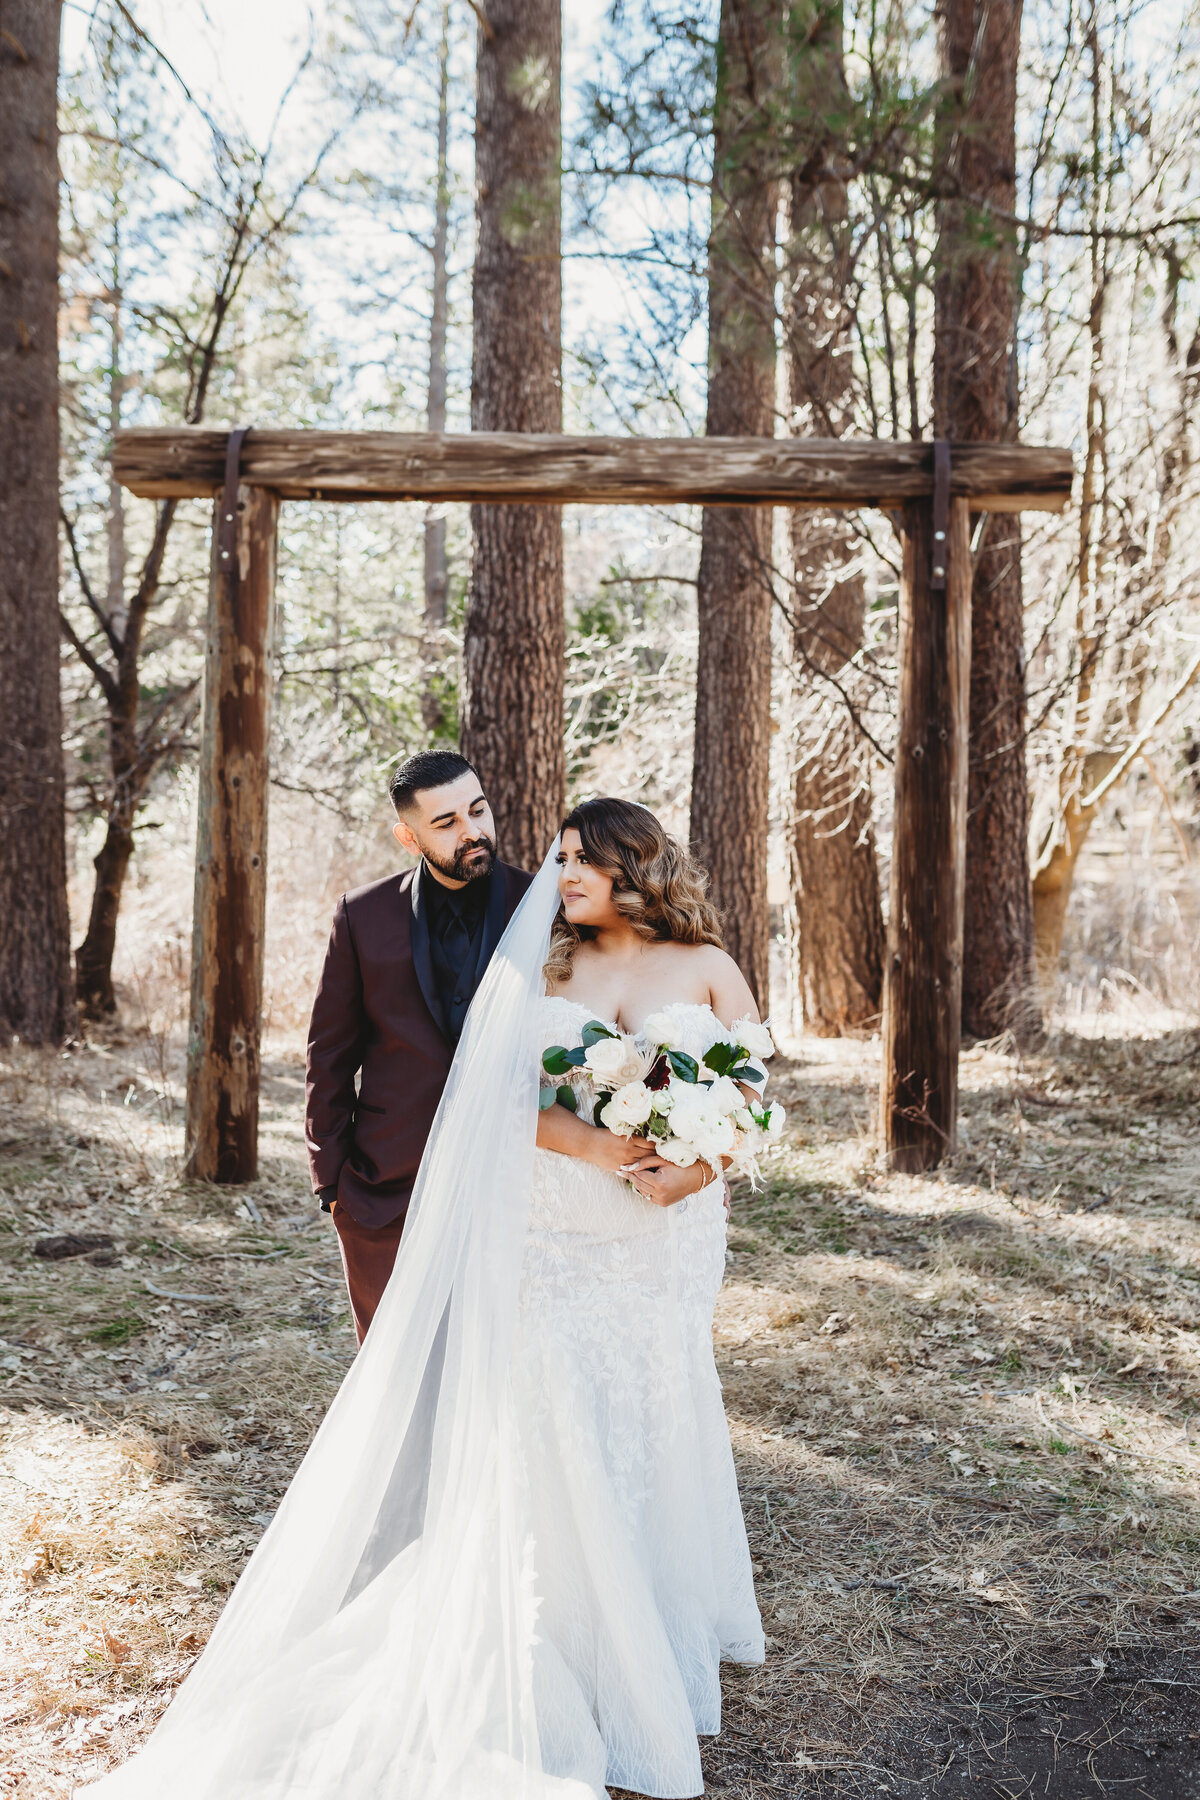 Juan and Giselle-Idyllwild Elopement-Janae Marie Photography130